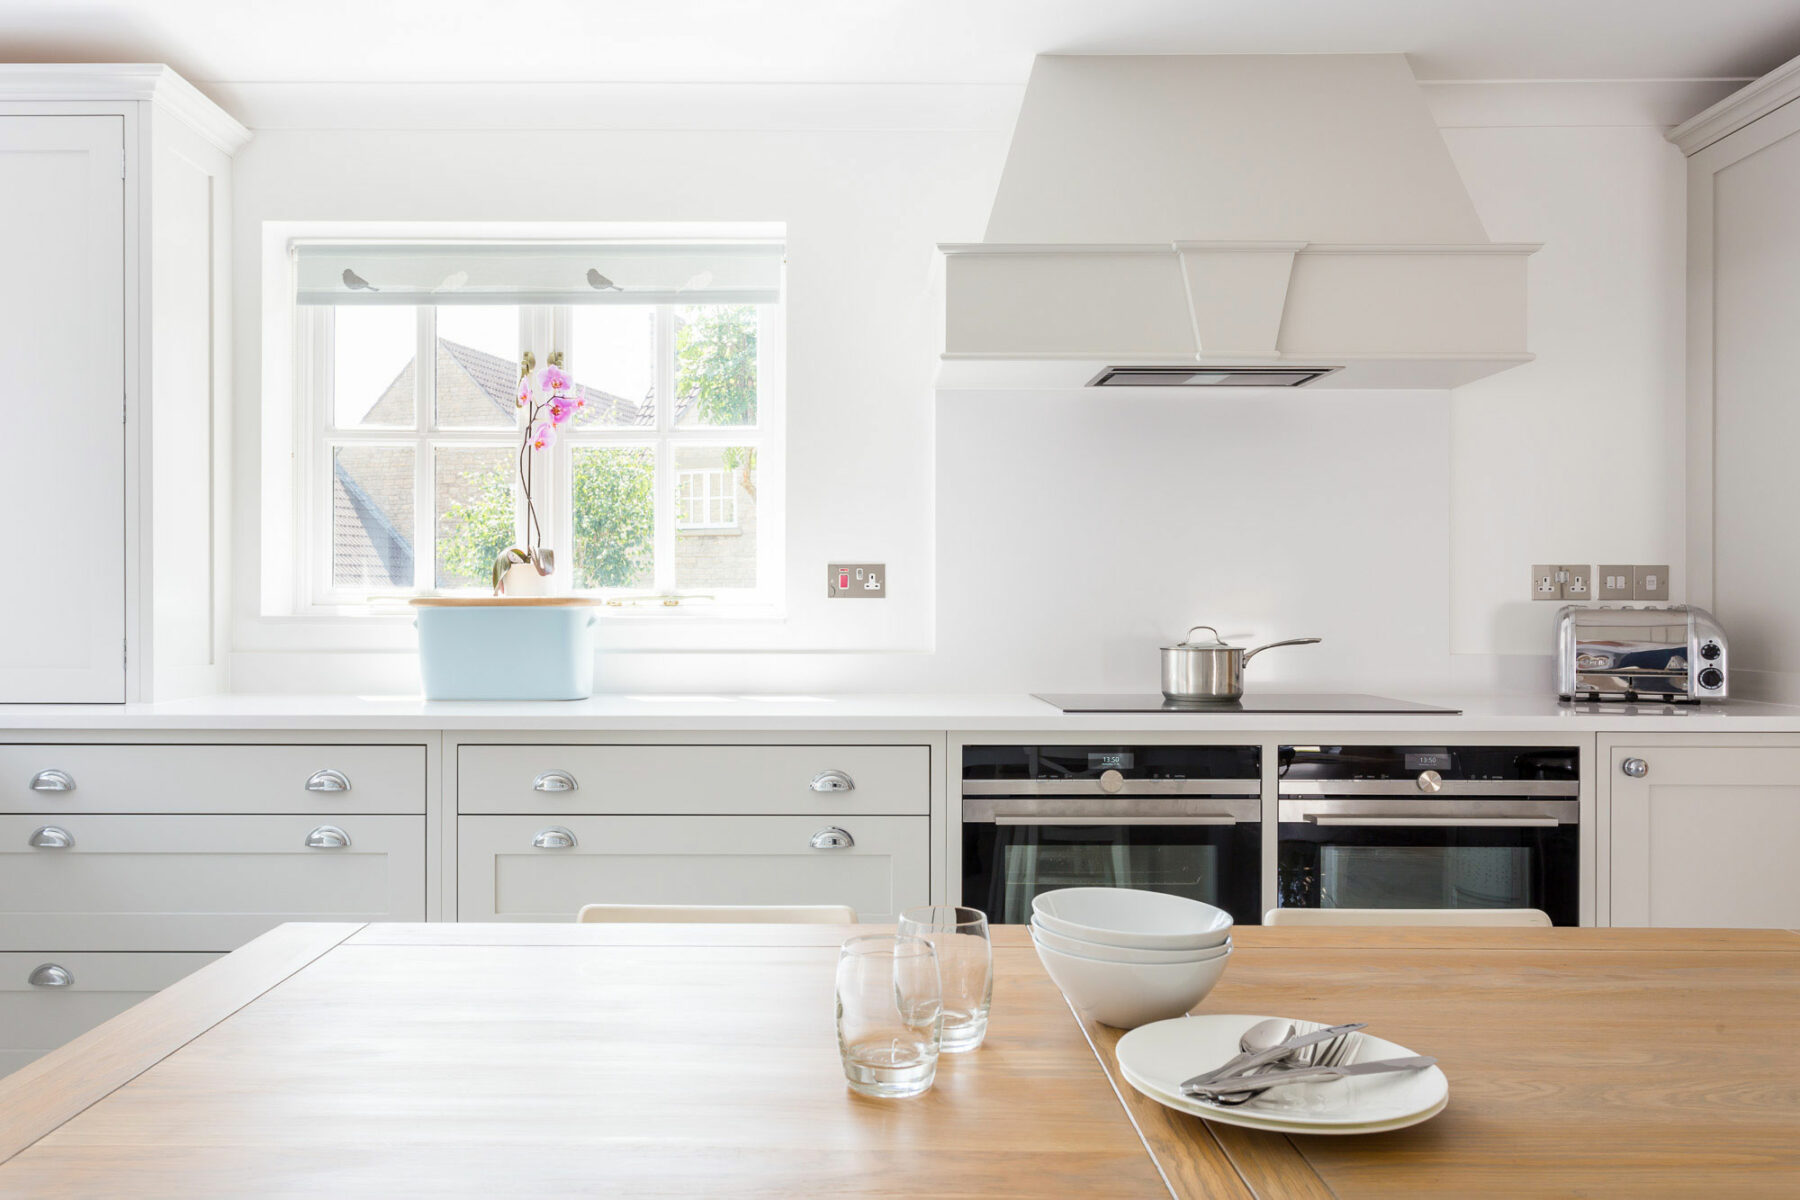 Contemporary white Shaker kitchen in Bath with bespoke cooker hood